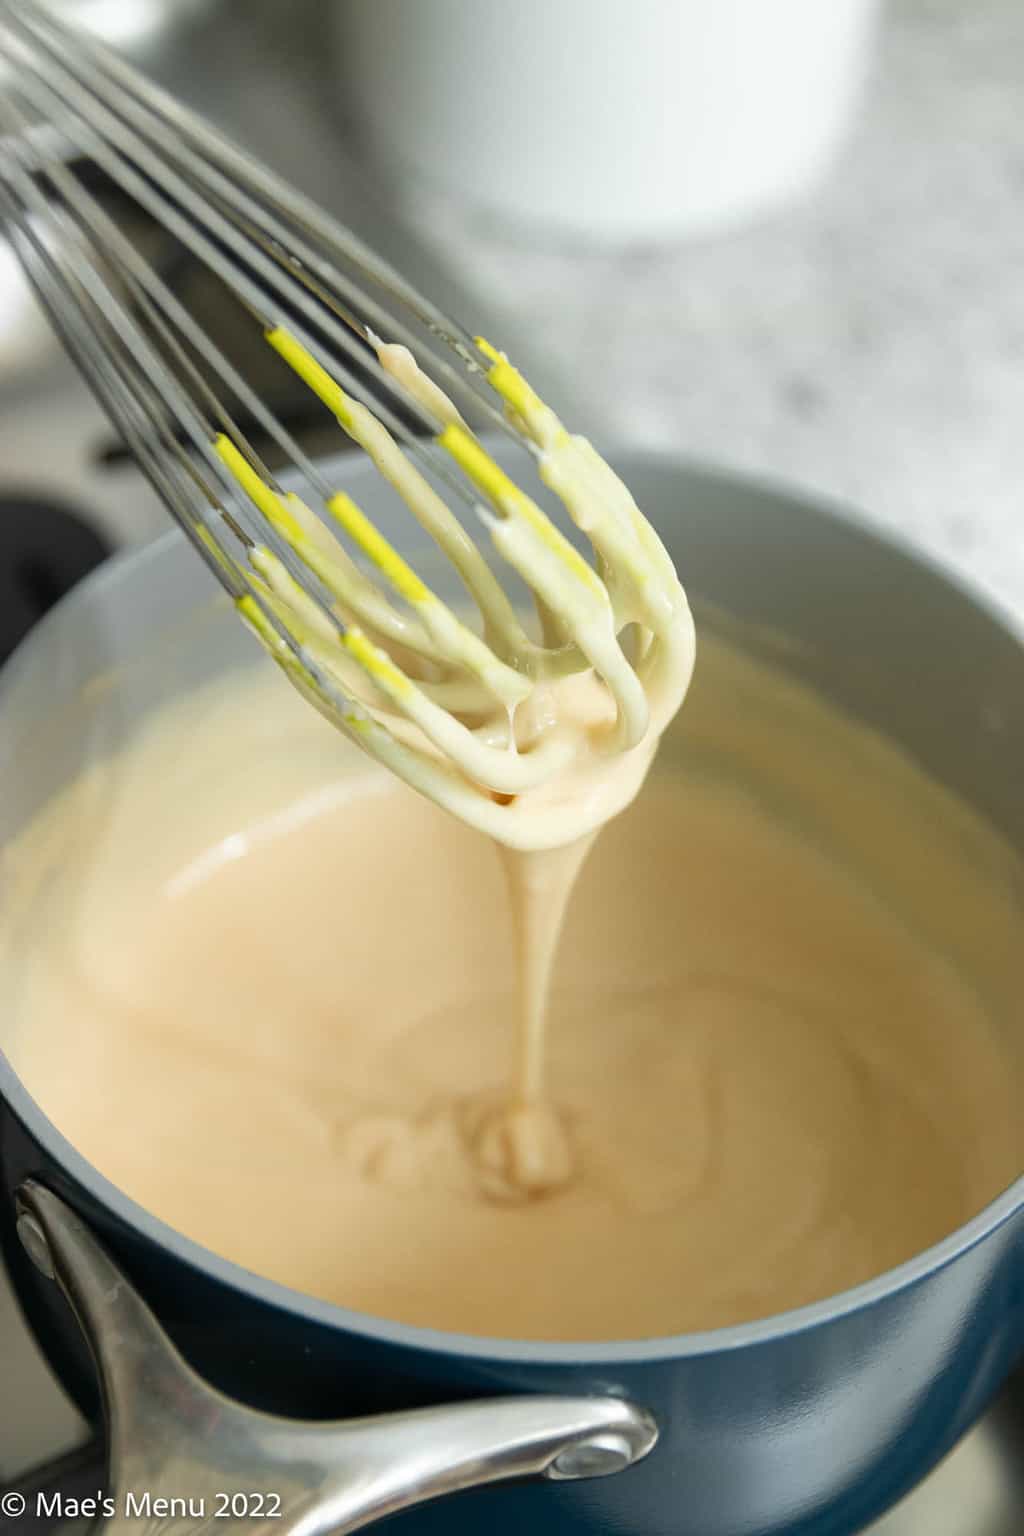 A whisk drizzling cheese sauce into a saucepan.